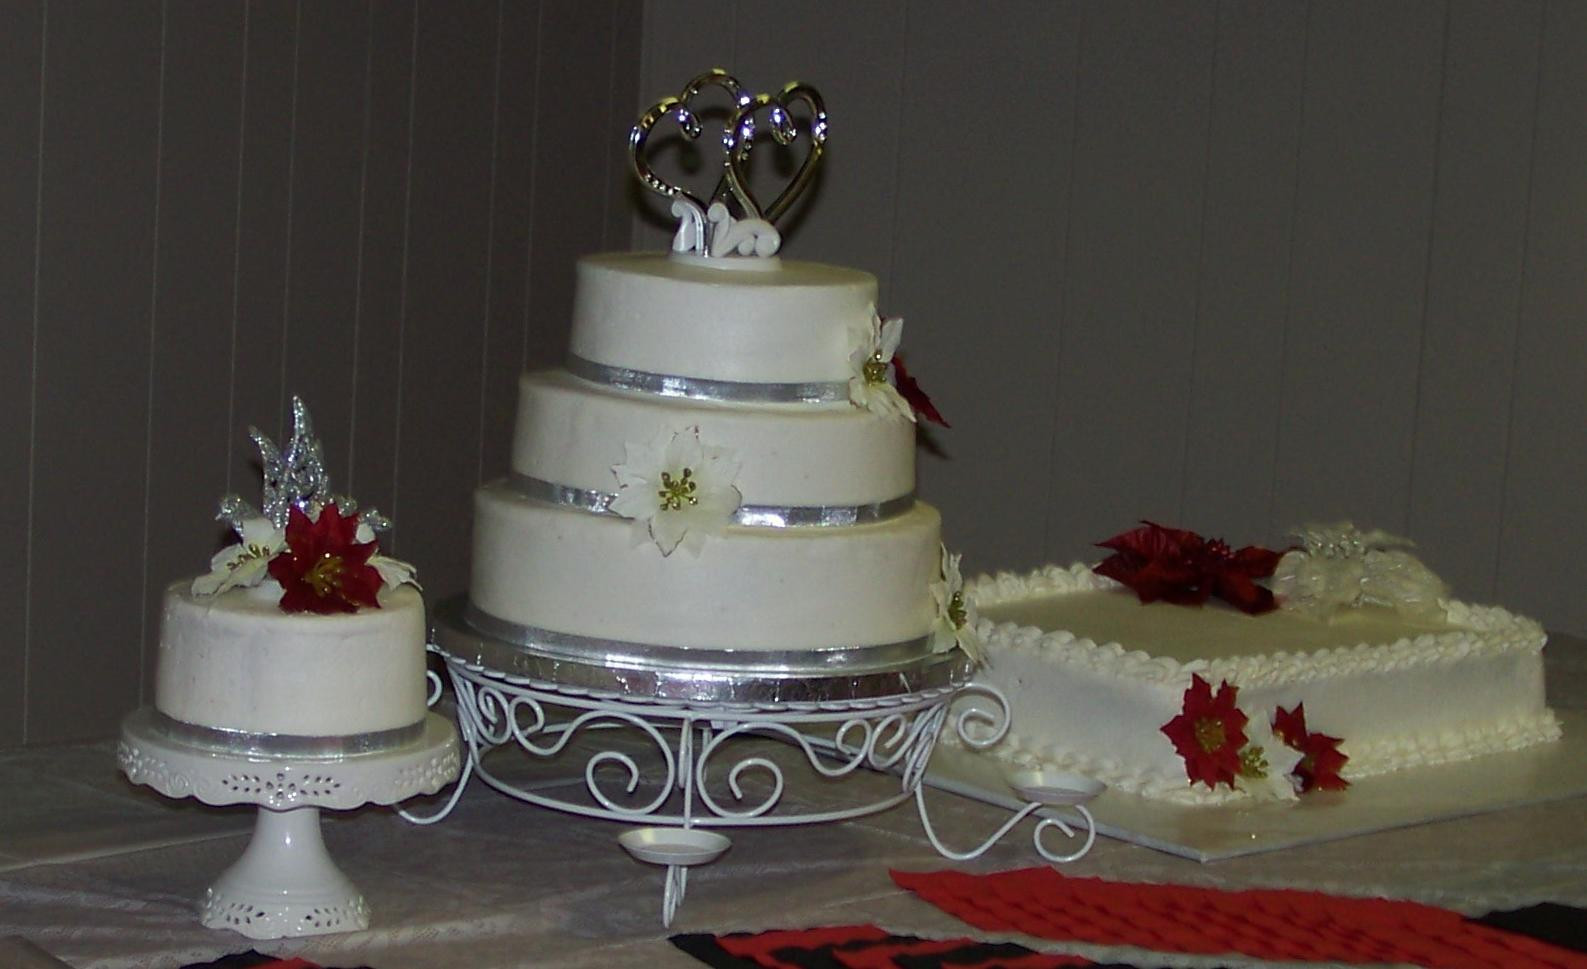 Walmart Wedding Cakes Prices And Pictures
 Tana s blog walmart wedding cakes